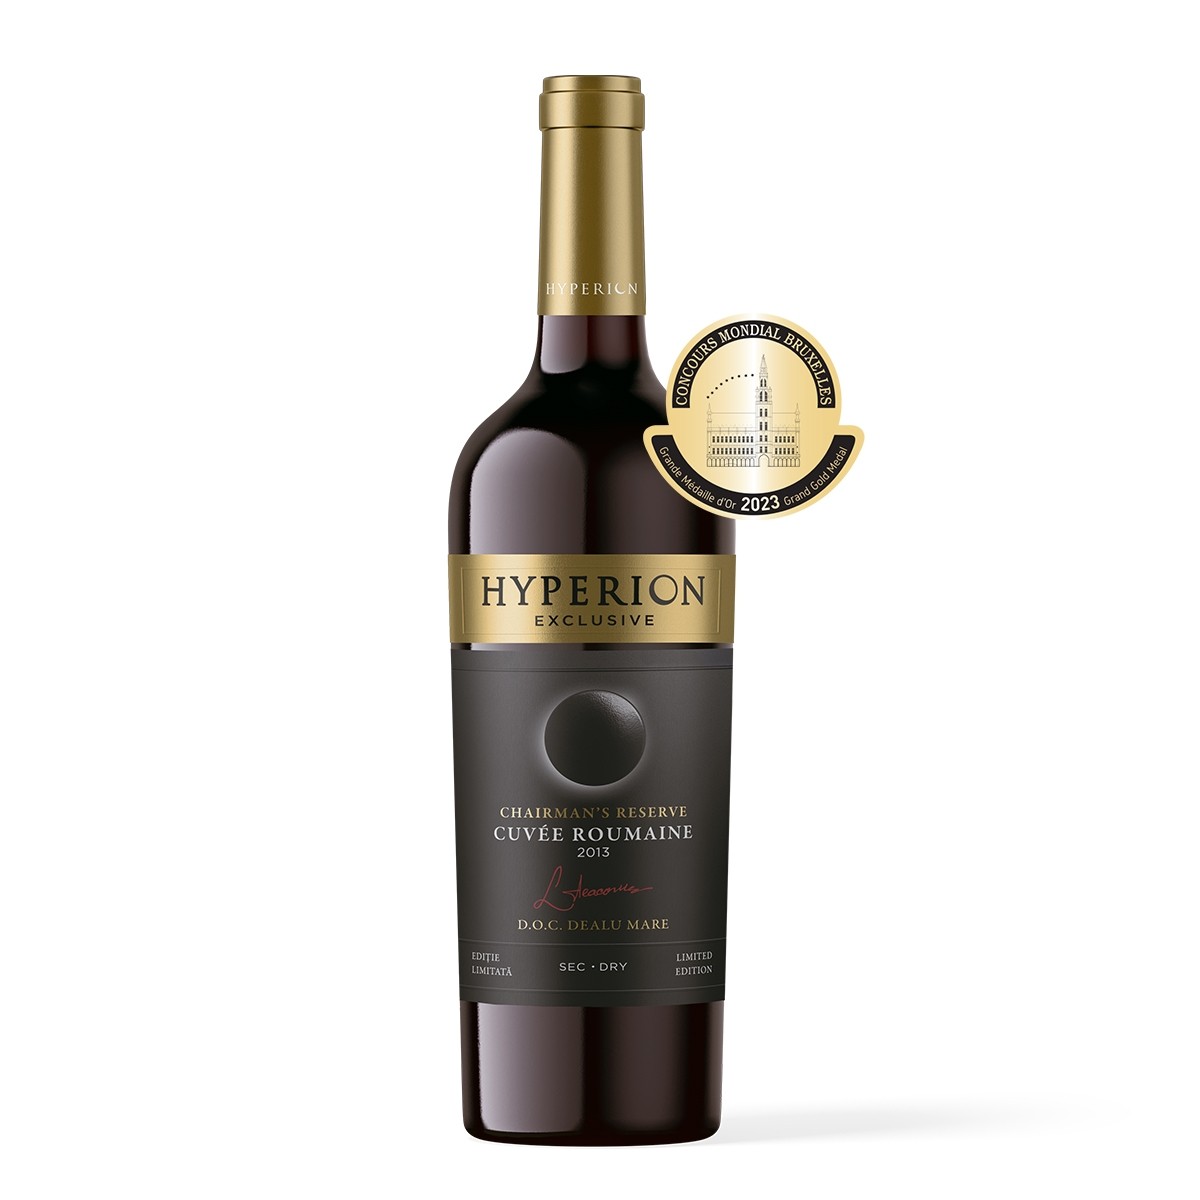 Hyperion Chairman's Reserve Cuvee Roumaine 2013